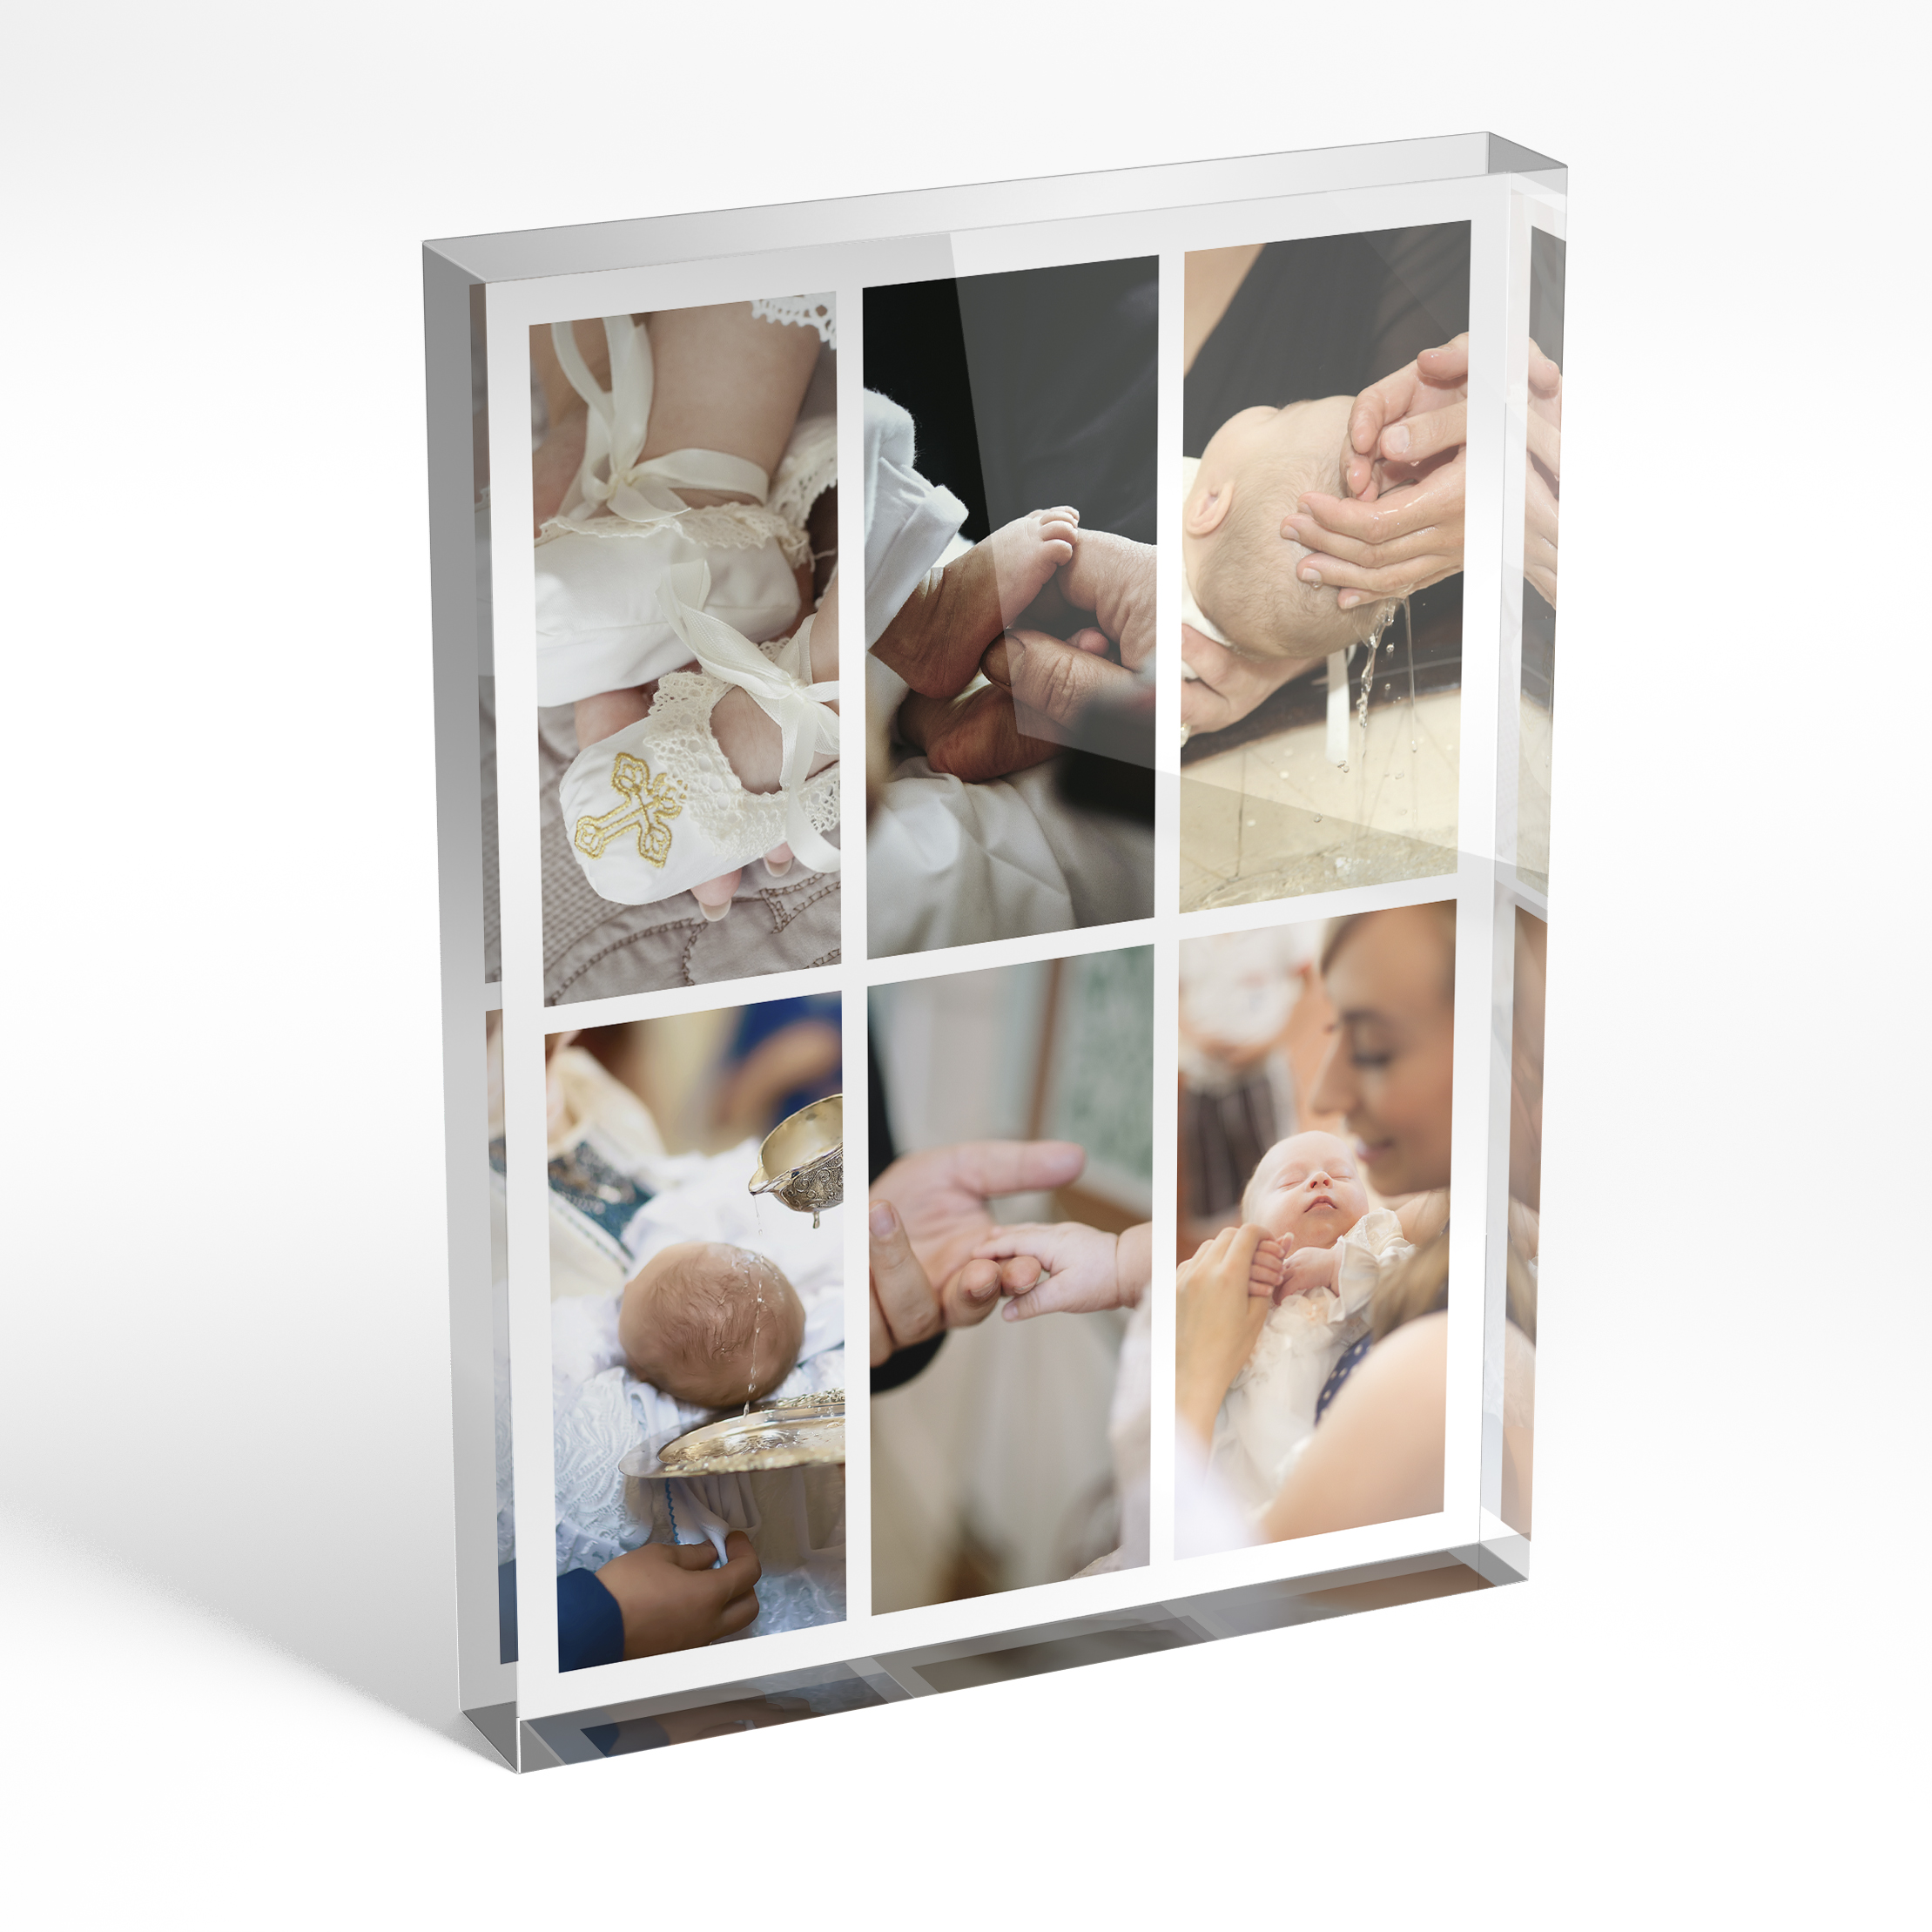 An angled side view of a portrait layout Perspex Photo Blocks with space for 6 photos. Thiis design is named "Photographic Symphony". 